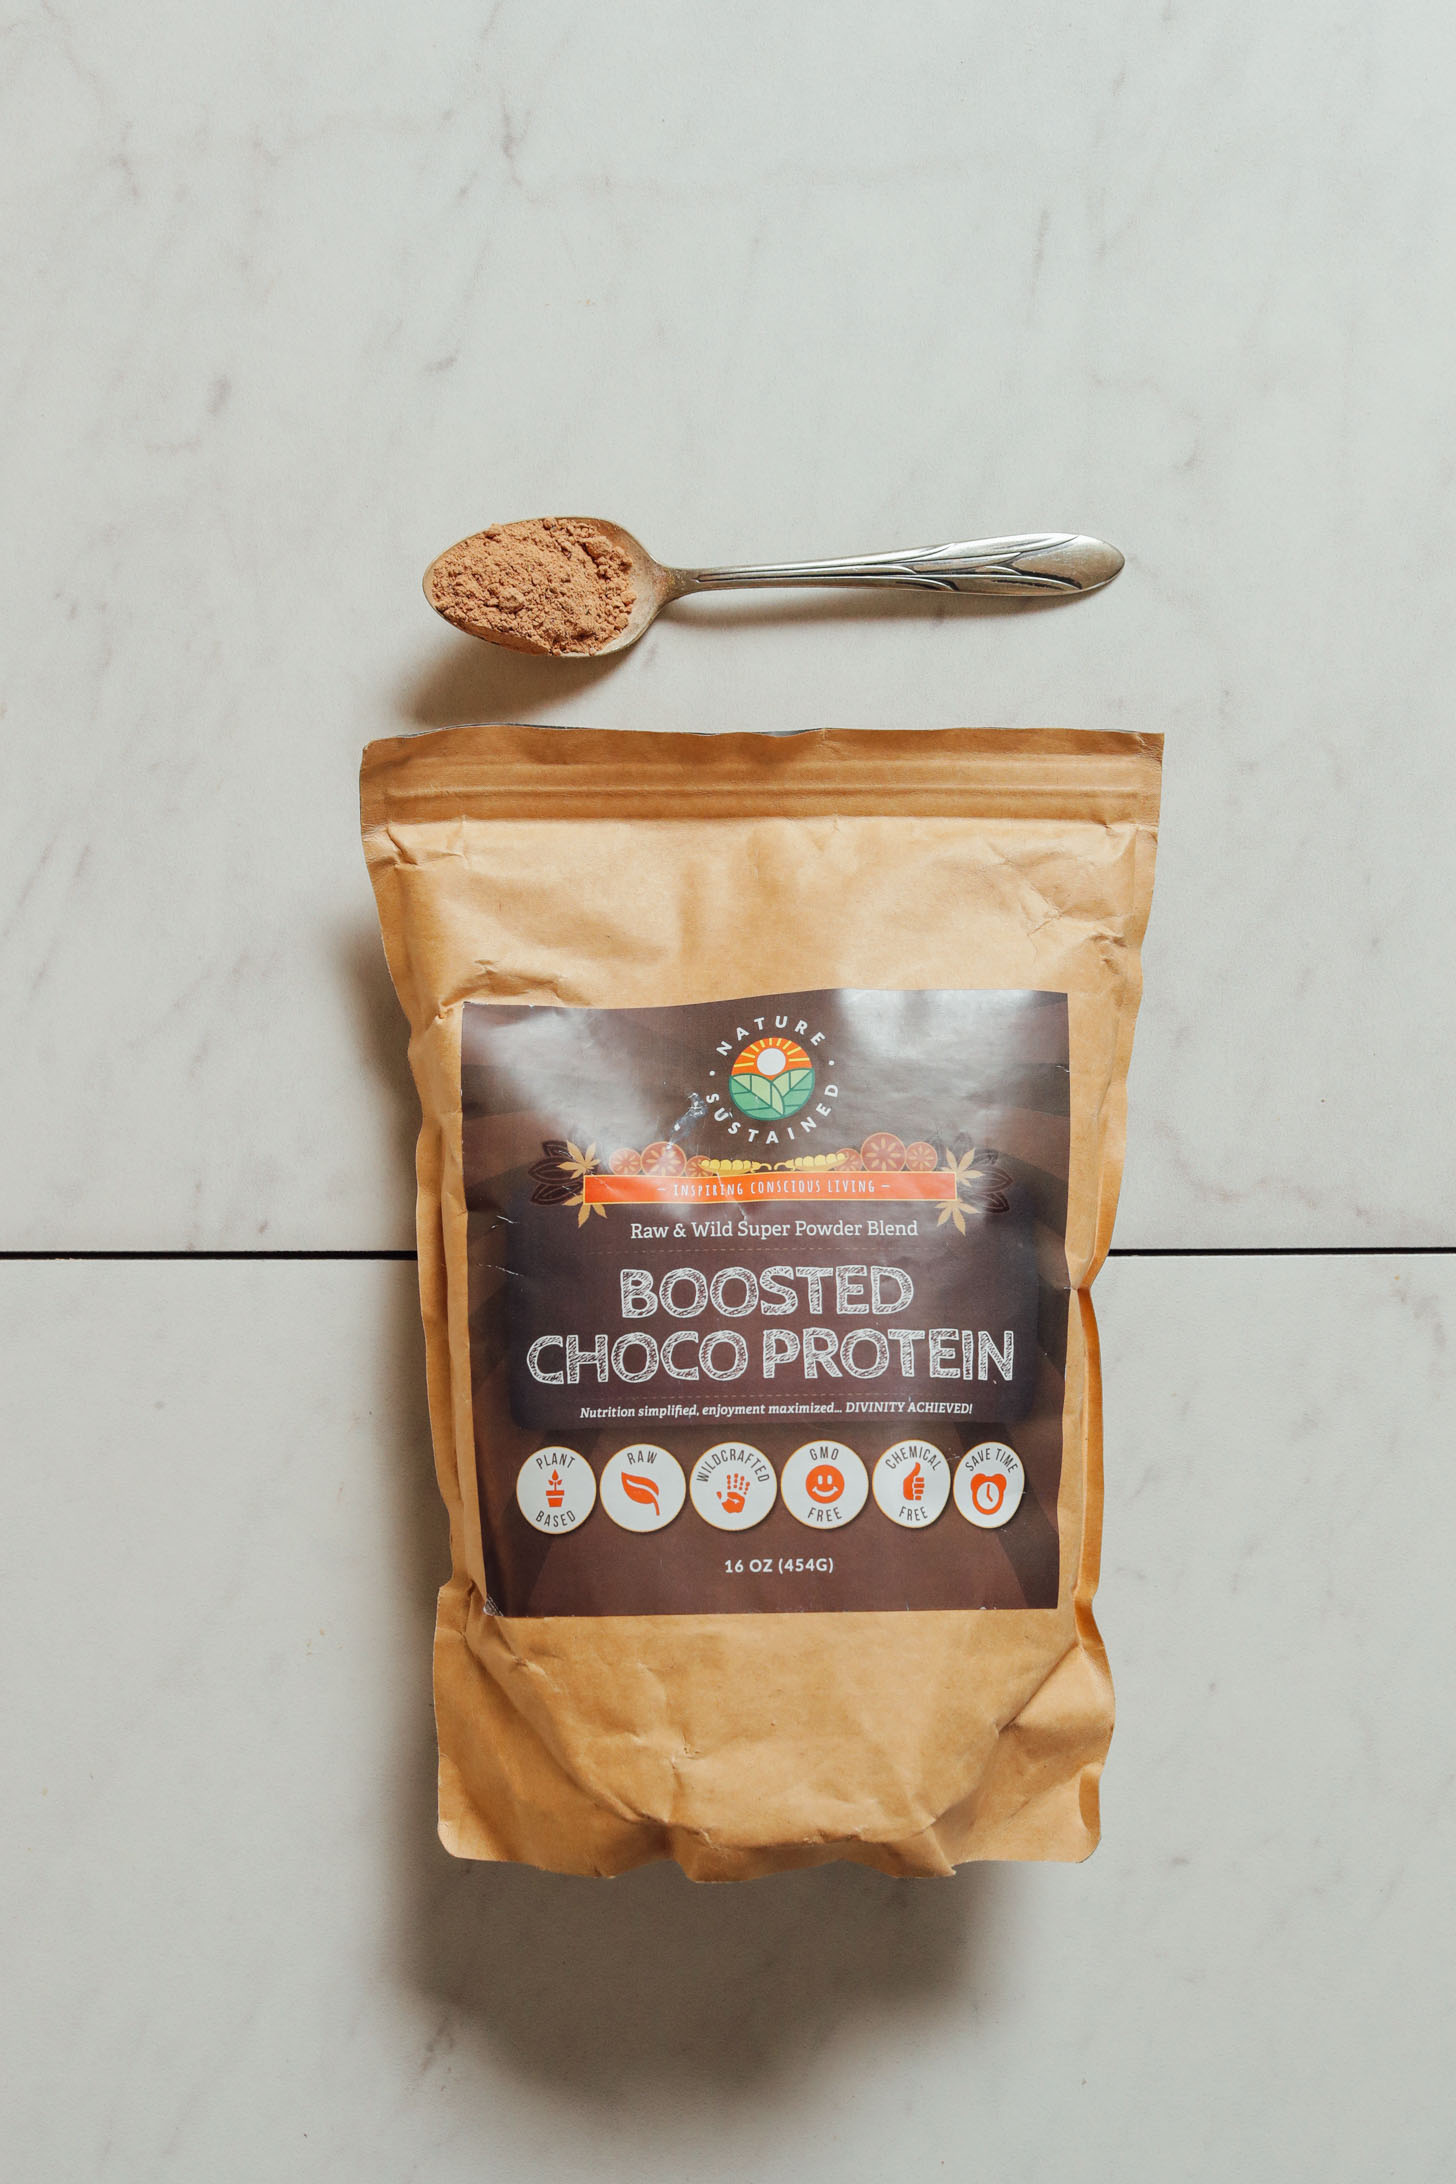 Bag of Nature Sustained Boosted Choco Protein for our plant-based protein review